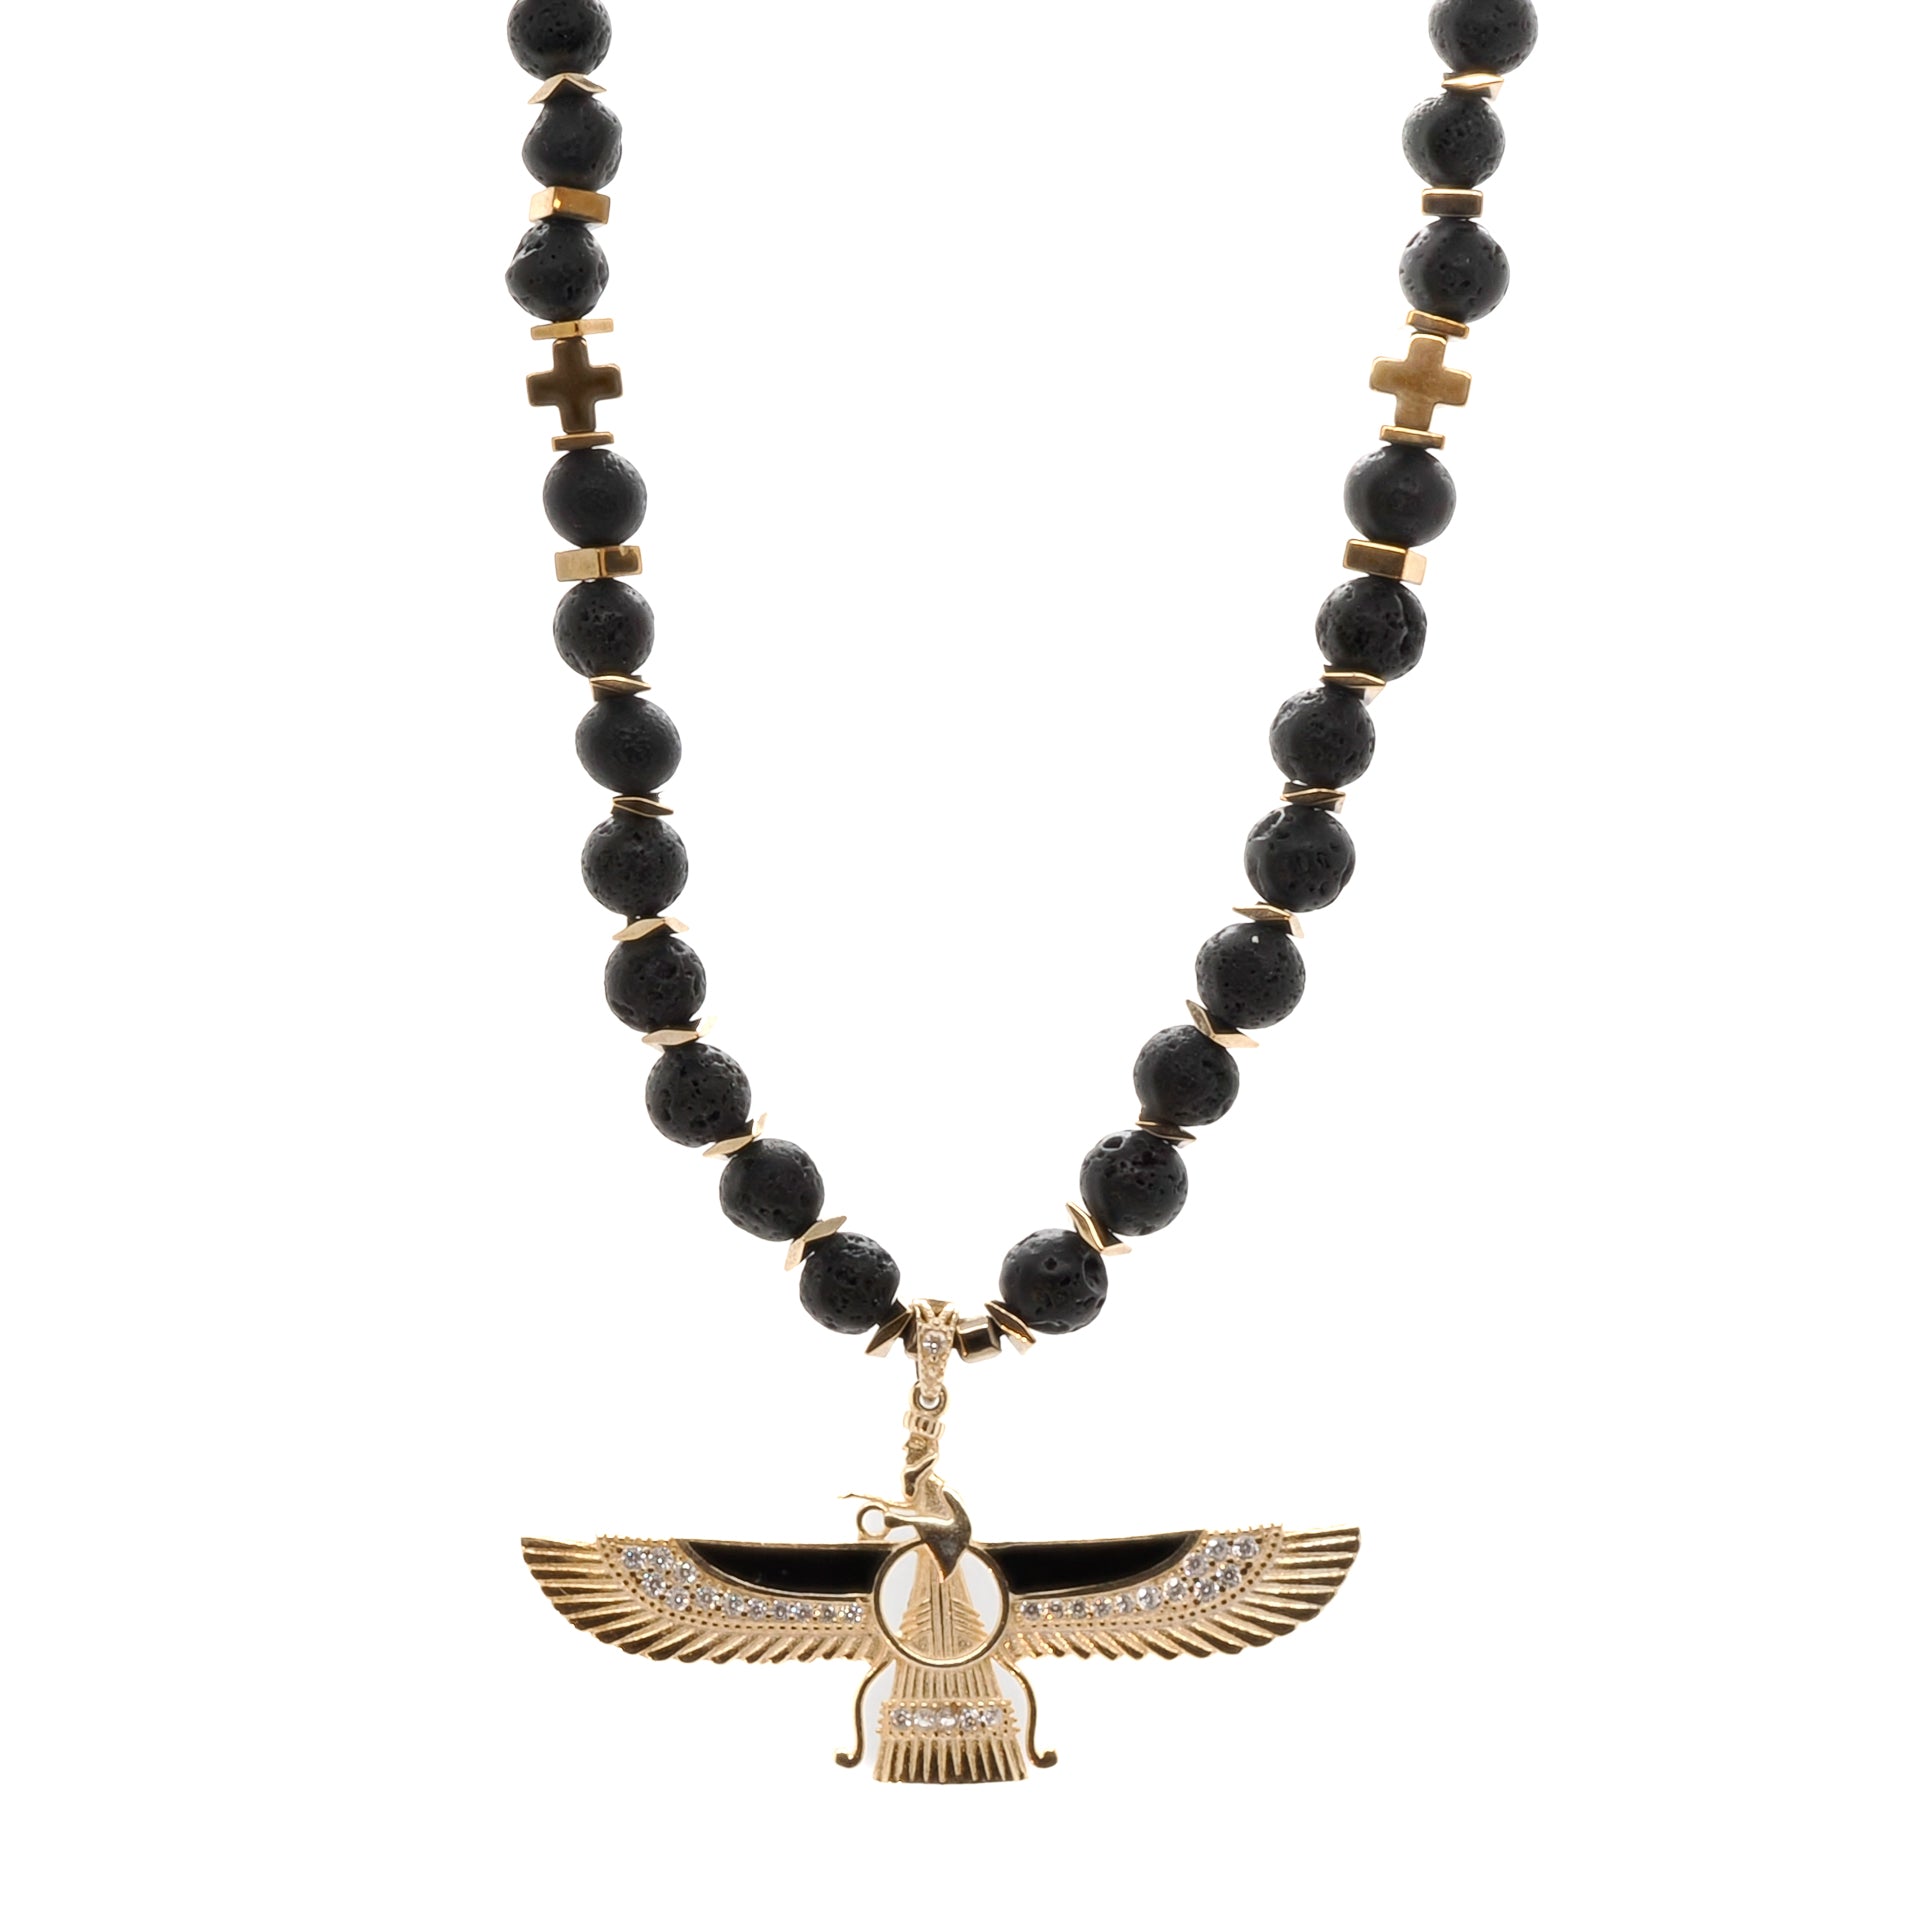 Faravahar Necklace with Symbolic Meaning - Enhance your spiritual journey with this beautiful necklace.